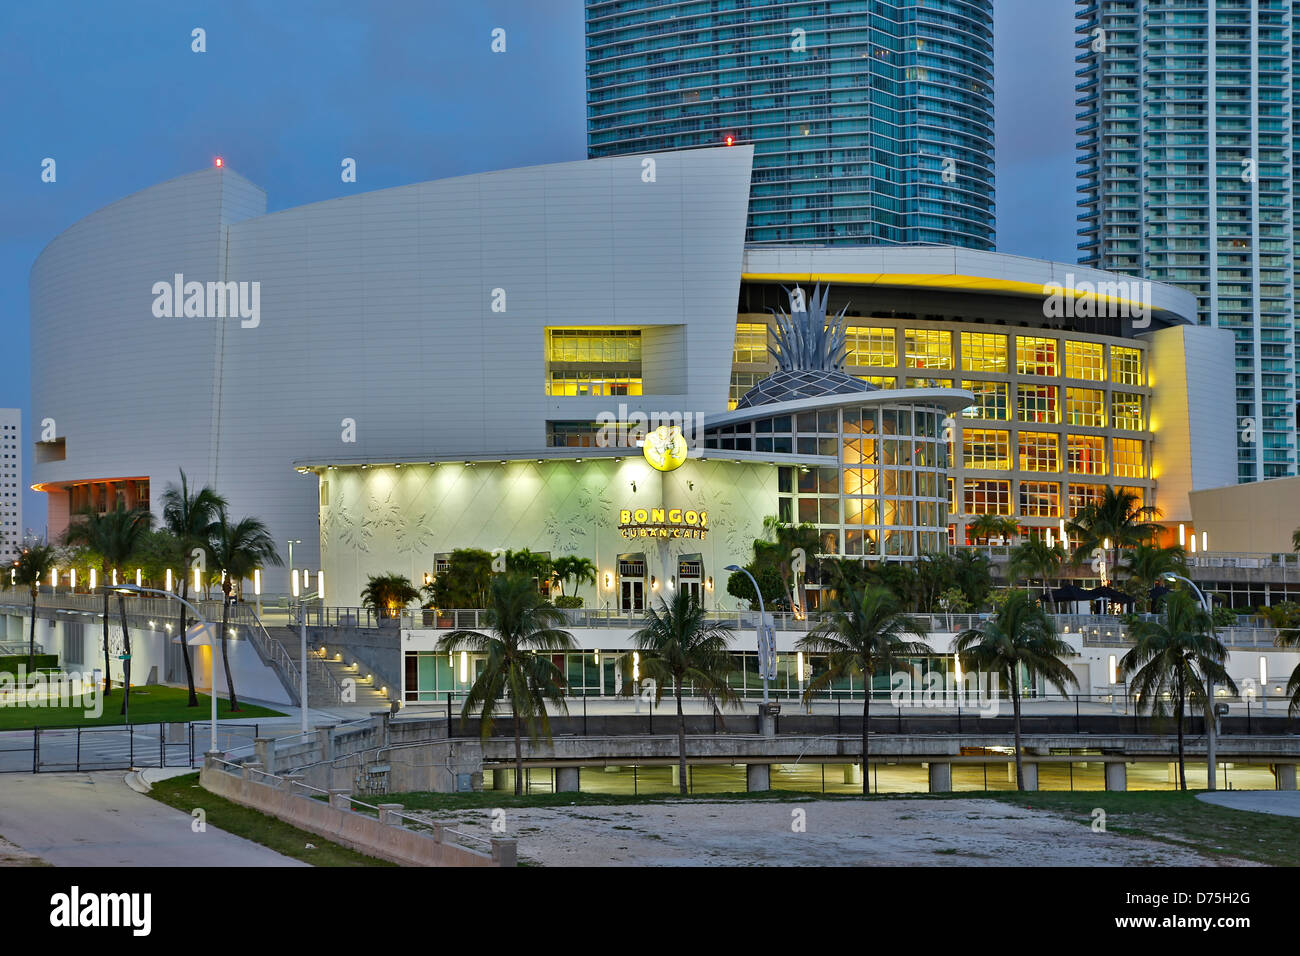 L'American Airlines Arena, Miami, Floride, USA Banque D'Images